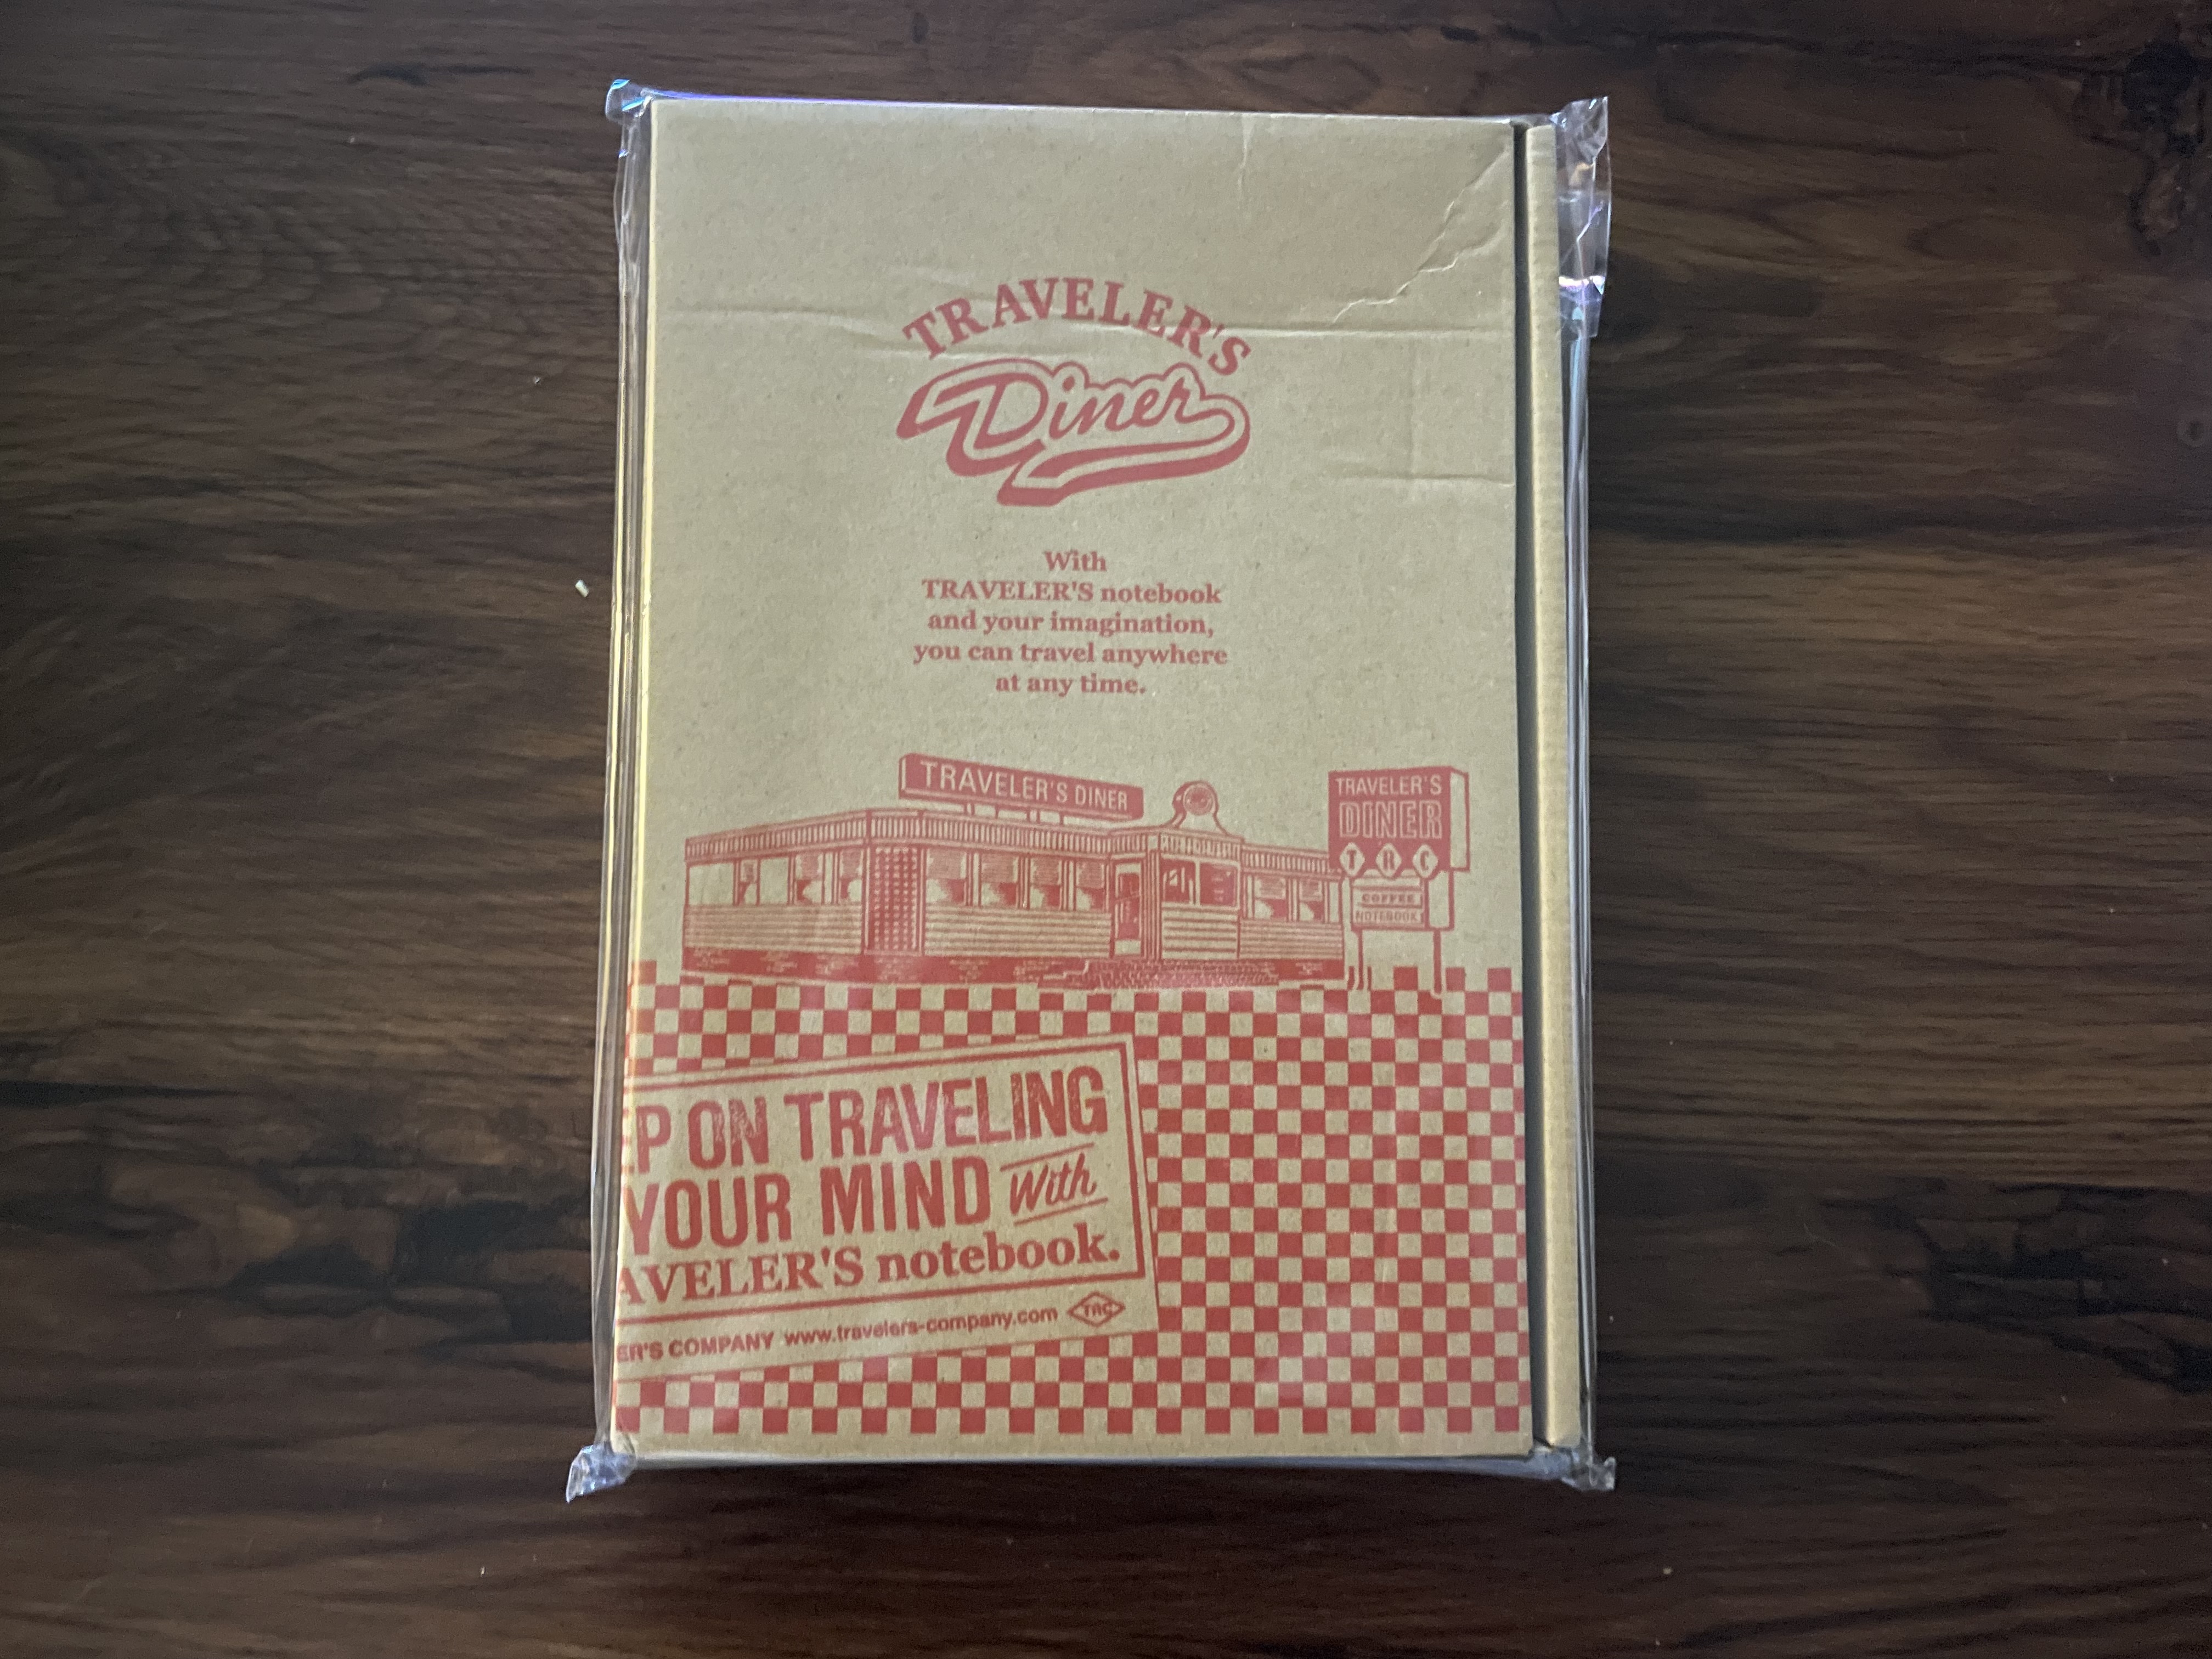 diner traveler's notebook box still in its package